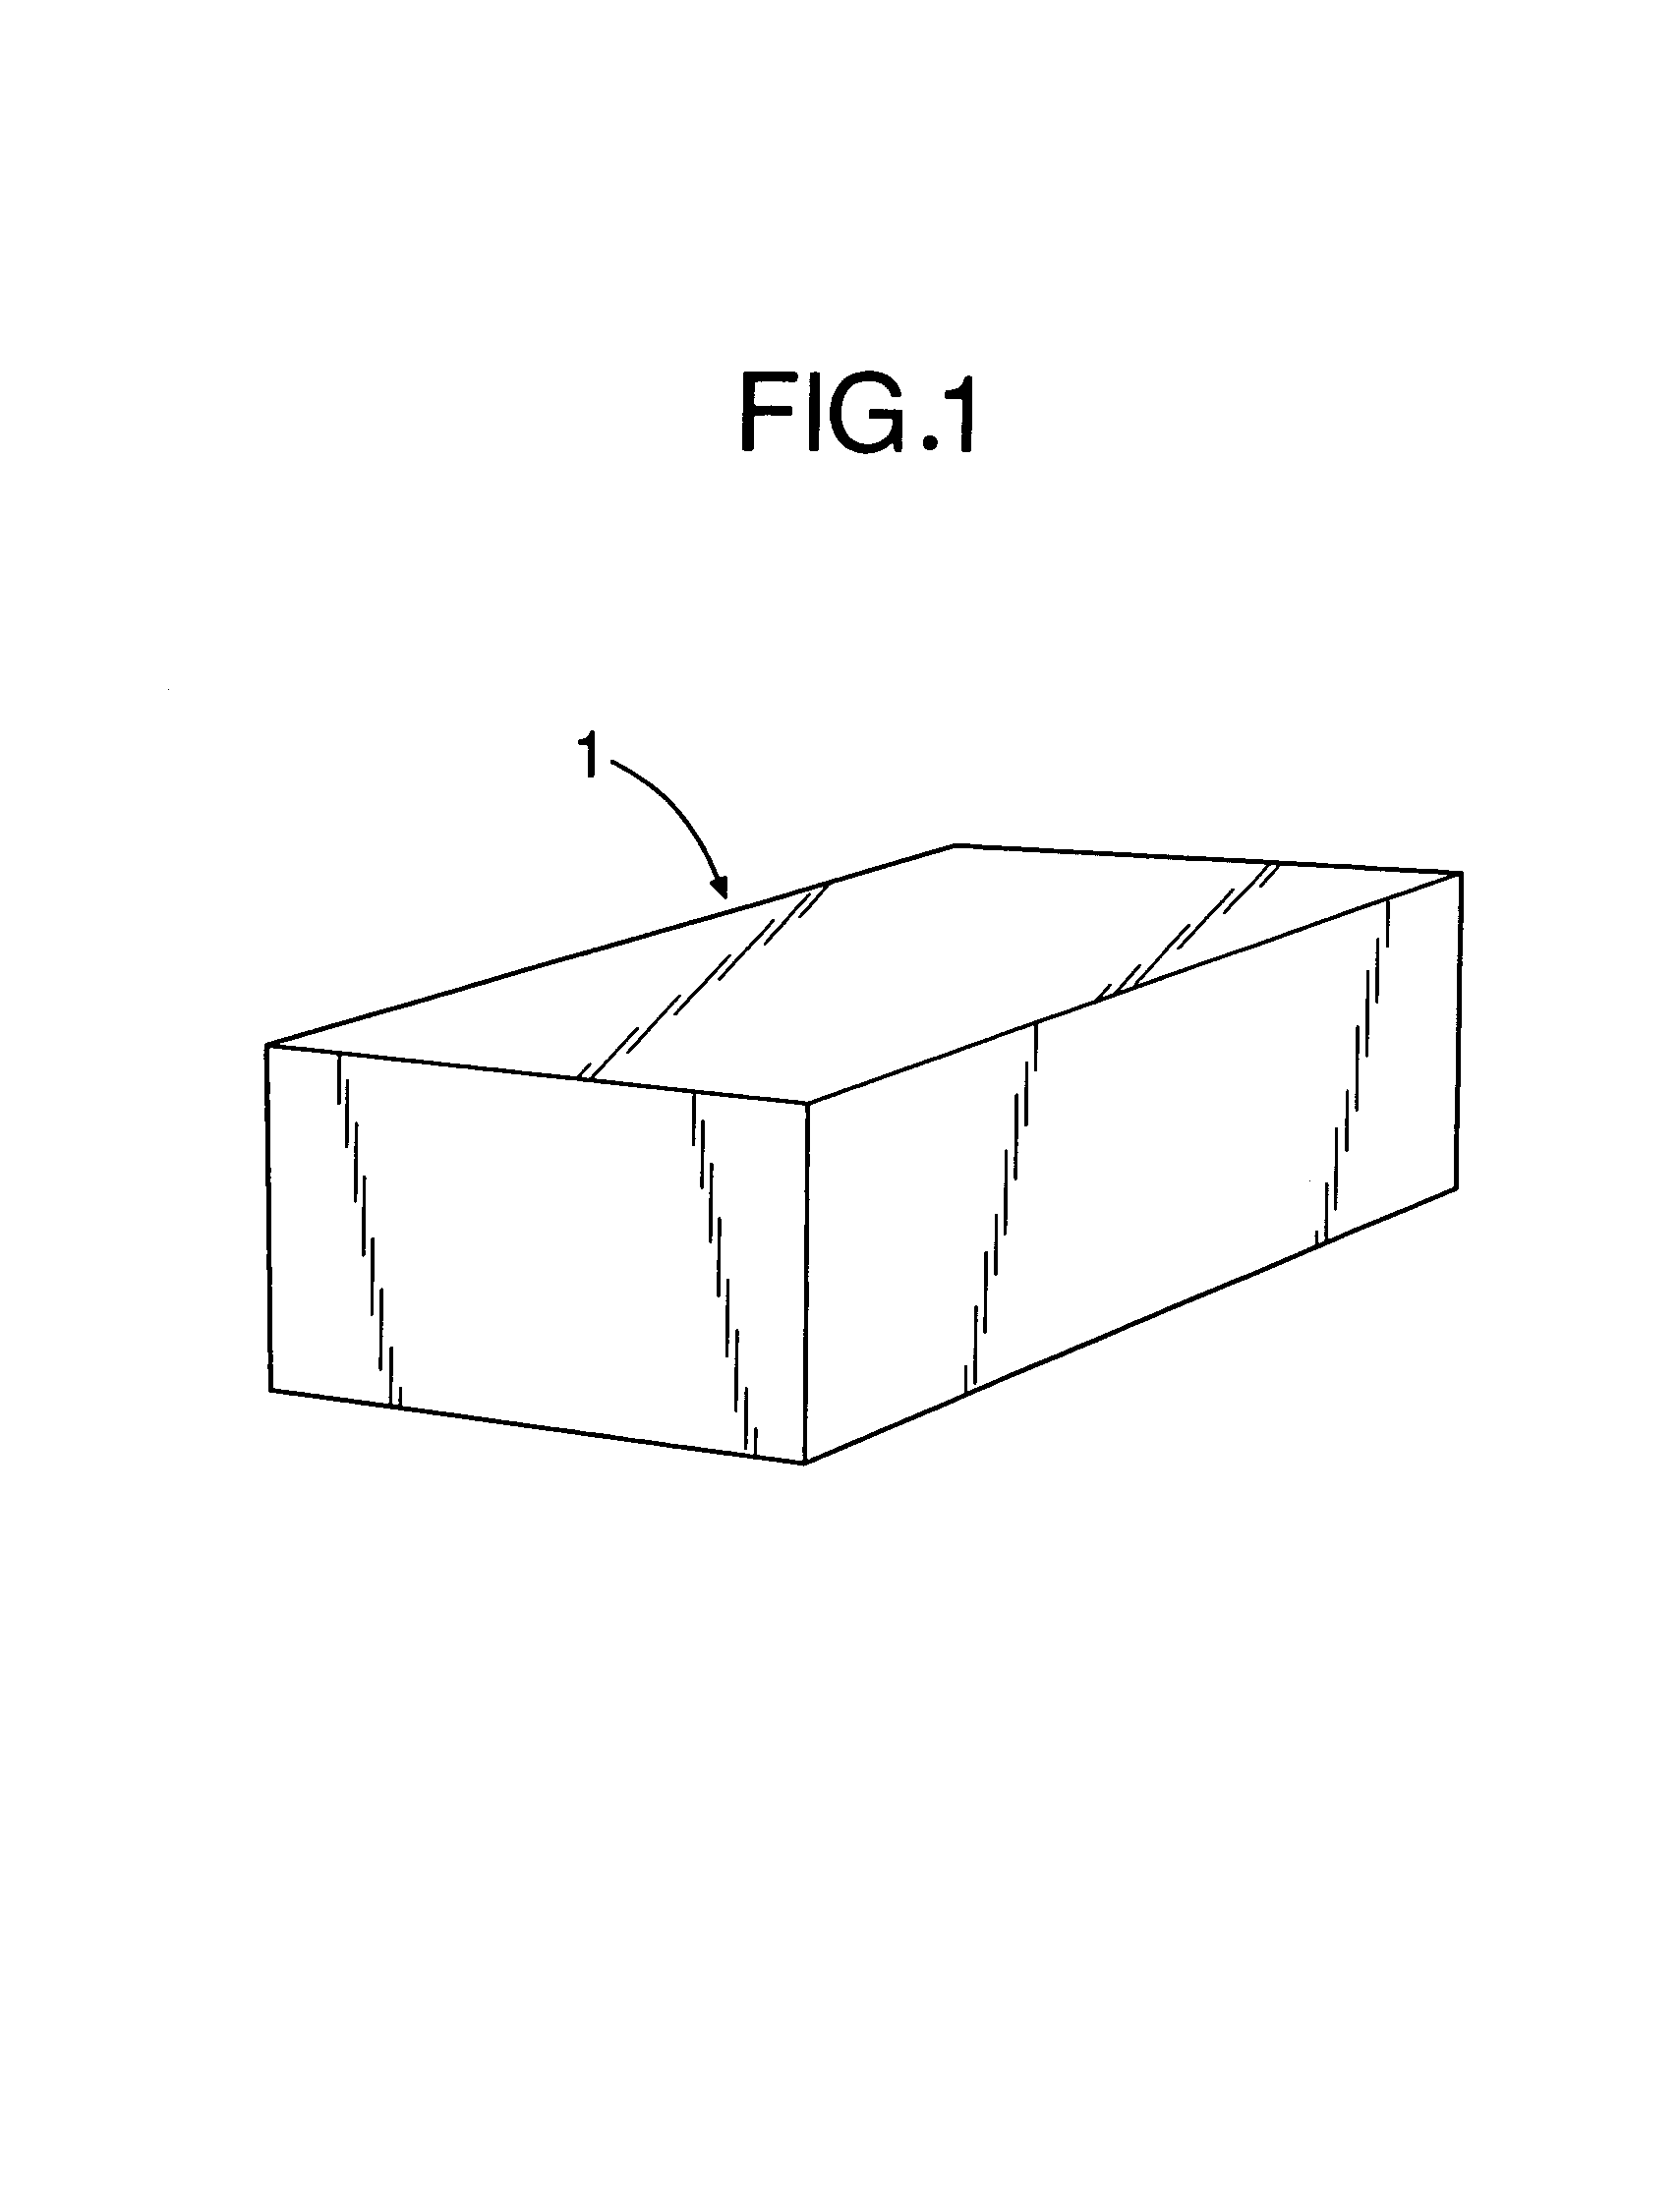 Process for producing ceramic molding having three-dimensional network structure